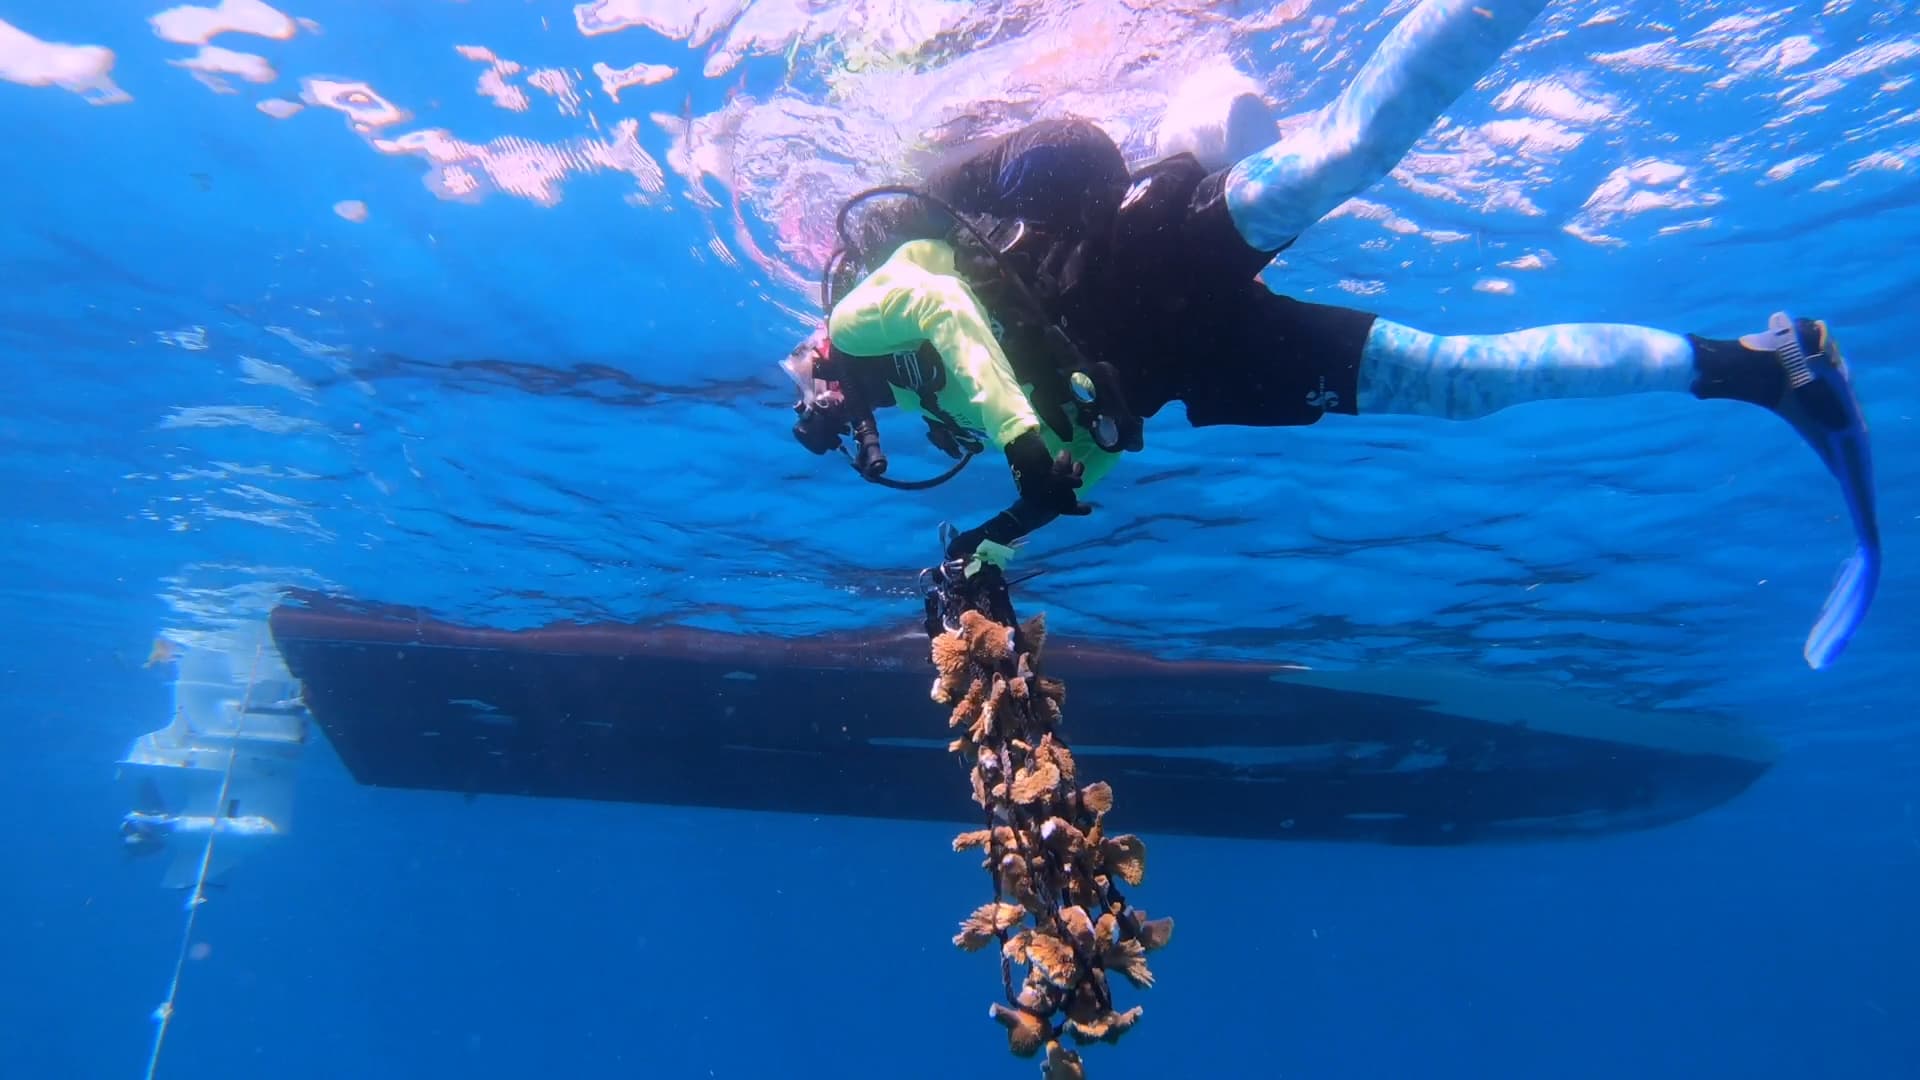 In recent weeks, scientists have been executing a significant and coordinated effort to rescue corals from the oceans off the coast of Florida.